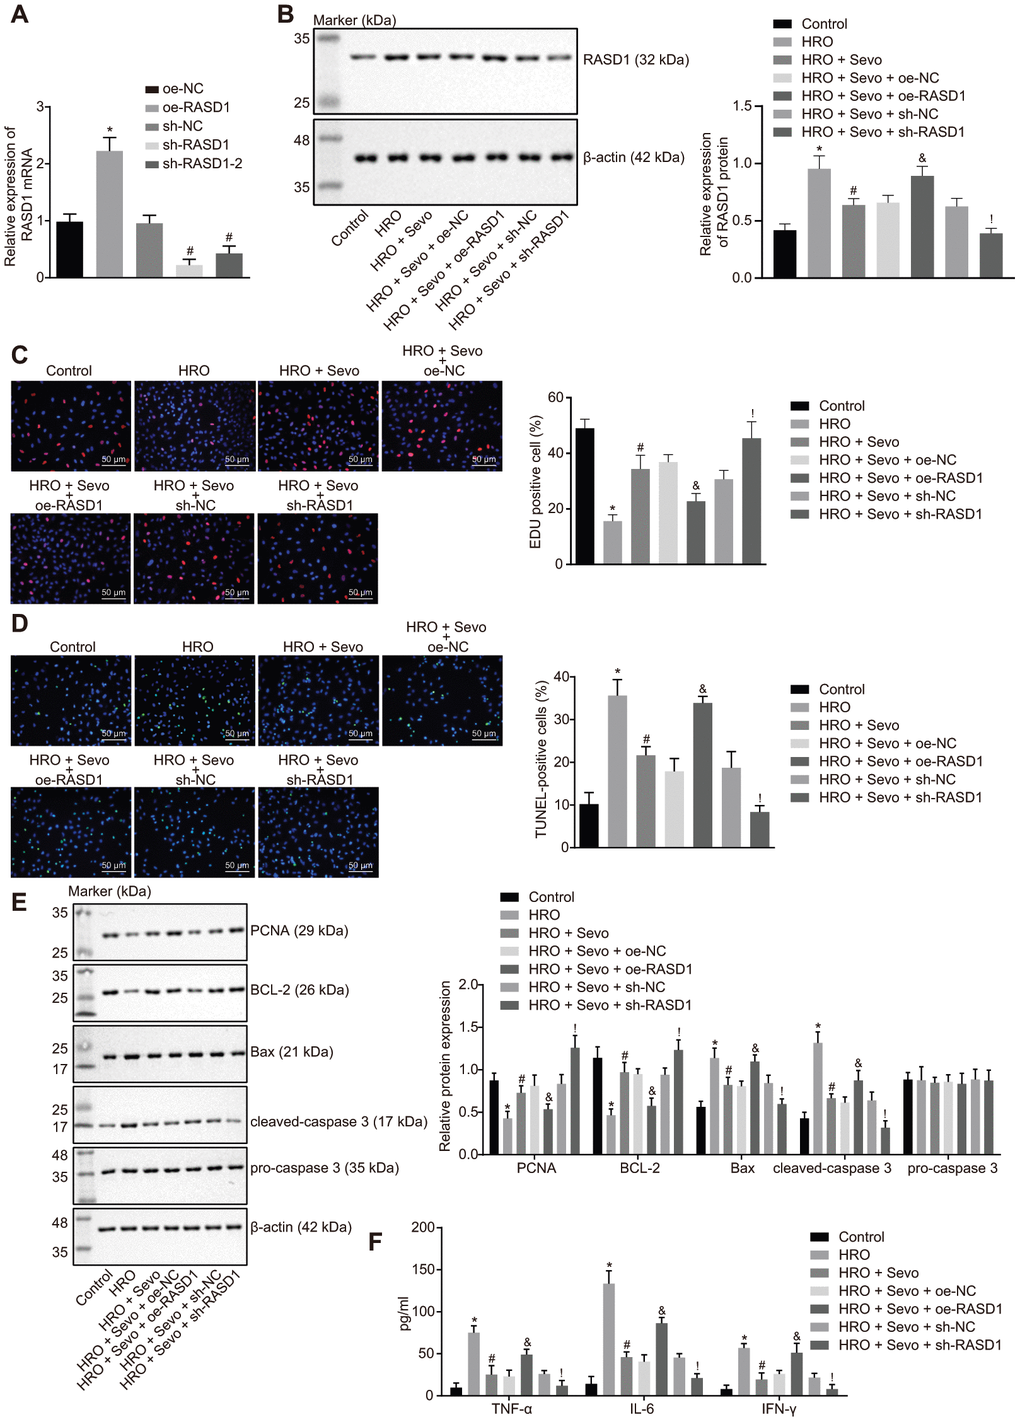 Sevoflurane treatment suppresses RASD1 expression to impede proliferation and stimulate apoptosis in skeletal muscle cells with I/R injury. (A) The expression pattern of RASD1 in cells after alteration of RASD1 detected using RT-qPCR. * p B) Protein level of RASD1 in cells after treatment with HRO, Sevoflurane and RASD1 alteration detected using Western blot analysis. * p p C) Cell proliferation measured using EdU assay (× 200). (D) Cell apoptosis measured by TUNEL assay (× 200). (E) Western blot analysis of the RASD1 expression pattern in cells. (F) Levels of IFN-γ, IL-6 and TNF-α in cells measured by ELISA. * p p p p 